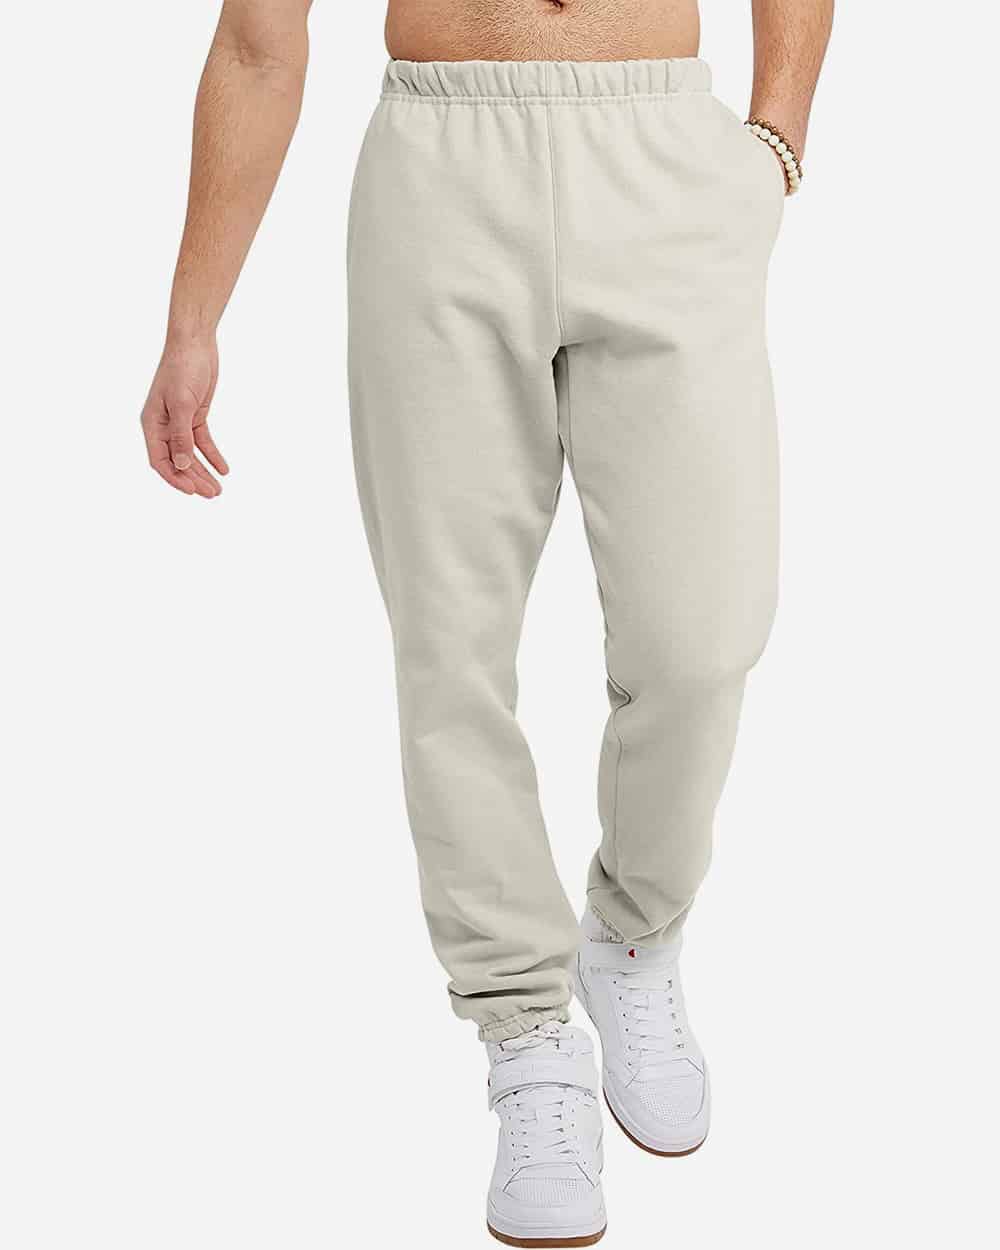 10 Heavyweight Sweatpants Brands Making The Thickest Joggers